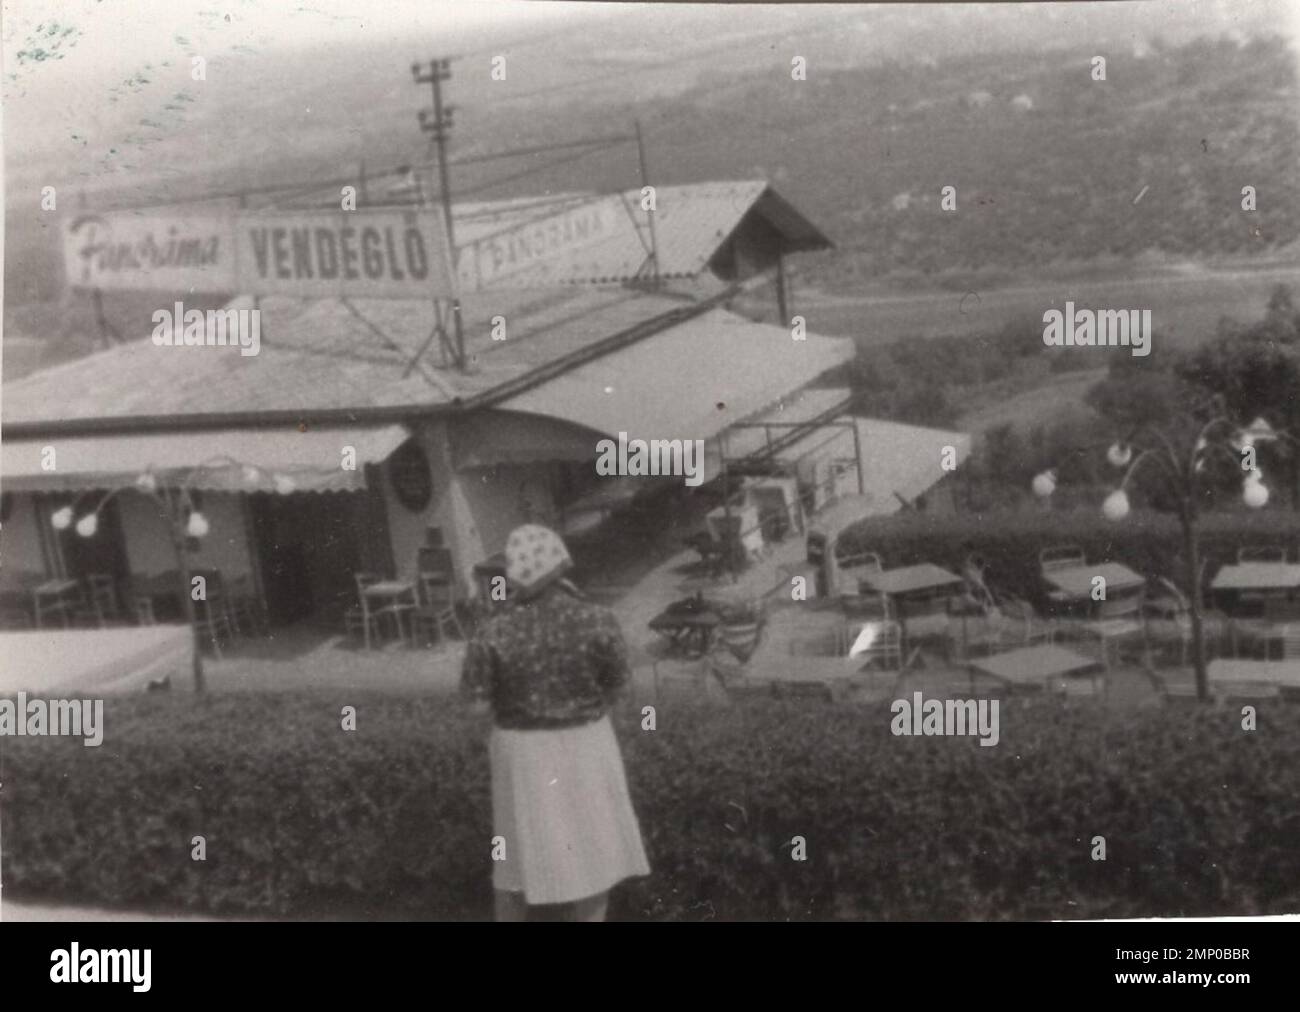 vintage moment / vintage funny moment / vintage photograph / power of the moment / magic moments / Panoráma vendéglő / hungary / 1930s / restaurant / vintage restaurant / lady / terrace tables / restaurant on the high / beautiful view / Stock Photo